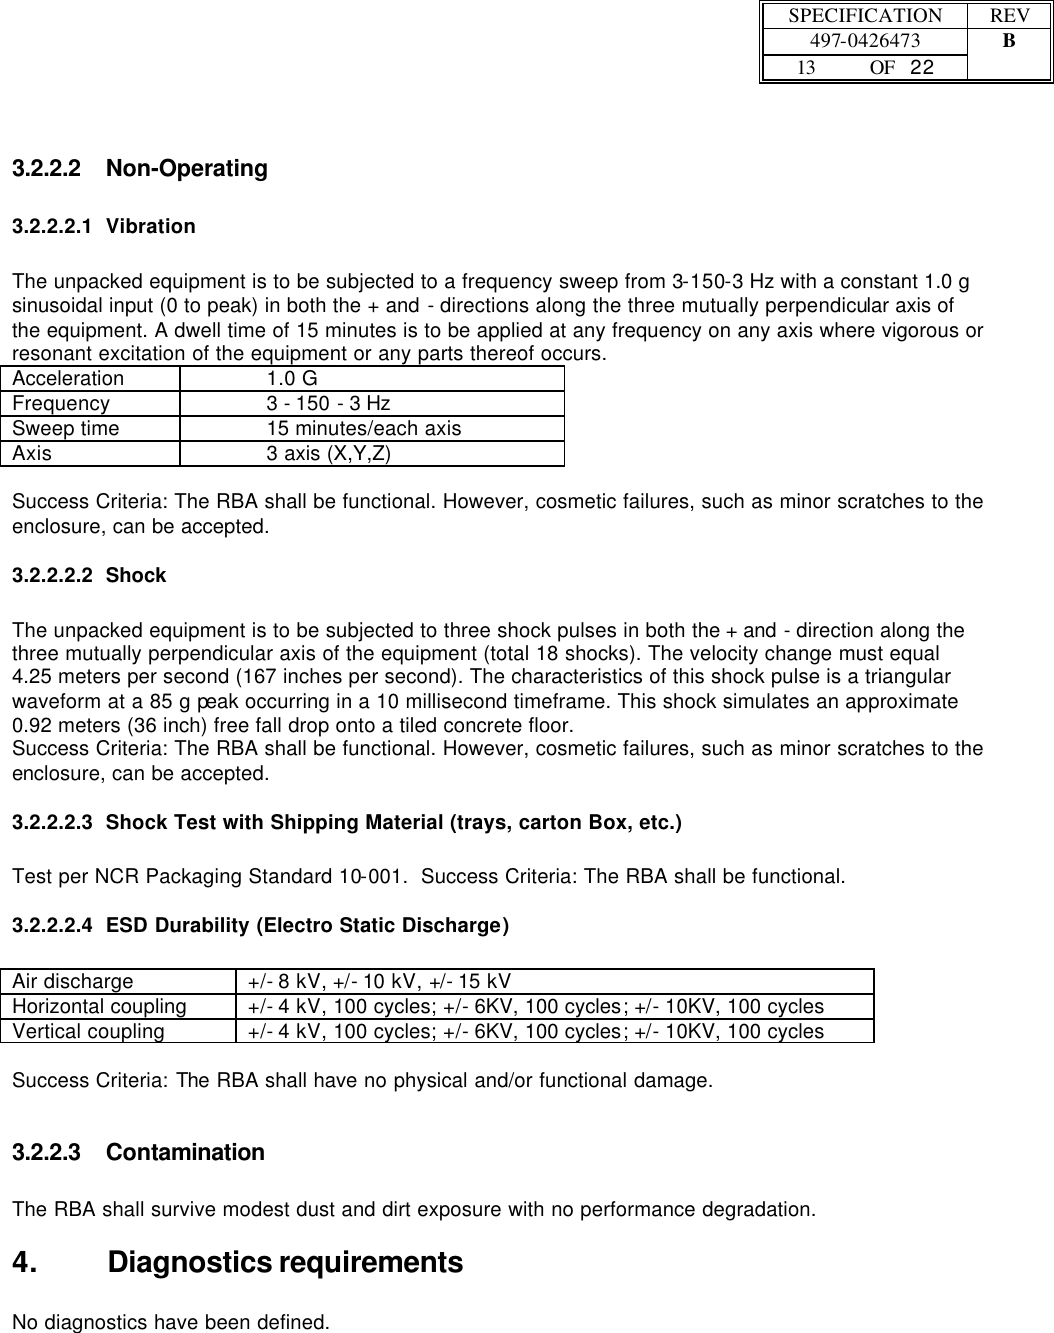  SPECIFICATION REV  497-0426473 B  13 OF   22    3.2.2.2 Non-Operating  3.2.2.2.1 Vibration  The unpacked equipment is to be subjected to a frequency sweep from 3-150-3 Hz with a constant 1.0 g sinusoidal input (0 to peak) in both the + and - directions along the three mutually perpendicular axis of the equipment. A dwell time of 15 minutes is to be applied at any frequency on any axis where vigorous or resonant excitation of the equipment or any parts thereof occurs. Acceleration     1.0 G Frequency        3 - 150 - 3 Hz Sweep time      15 minutes/each axis Axis     3 axis (X,Y,Z)  Success Criteria: The RBA shall be functional. However, cosmetic failures, such as minor scratches to the enclosure, can be accepted. 3.2.2.2.2 Shock   The unpacked equipment is to be subjected to three shock pulses in both the + and - direction along the three mutually perpendicular axis of the equipment (total 18 shocks). The velocity change must equal 4.25 meters per second (167 inches per second). The characteristics of this shock pulse is a triangular waveform at a 85 g peak occurring in a 10 millisecond timeframe. This shock simulates an approximate 0.92 meters (36 inch) free fall drop onto a tiled concrete floor.  Success Criteria: The RBA shall be functional. However, cosmetic failures, such as minor scratches to the enclosure, can be accepted. 3.2.2.2.3 Shock Test with Shipping Material (trays, carton Box, etc.)  Test per NCR Packaging Standard 10-001.  Success Criteria: The RBA shall be functional.  3.2.2.2.4 ESD Durability (Electro Static Discharge)  Air discharge +/- 8 kV, +/- 10 kV, +/- 15 kV Horizontal coupling +/- 4 kV, 100 cycles; +/- 6KV, 100 cycles; +/- 10KV, 100 cycles Vertical coupling +/- 4 kV, 100 cycles; +/- 6KV, 100 cycles; +/- 10KV, 100 cycles  Success Criteria: The RBA shall have no physical and/or functional damage. 3.2.2.3 Contamination  The RBA shall survive modest dust and dirt exposure with no performance degradation. 4. Diagnostics requirements  No diagnostics have been defined.  